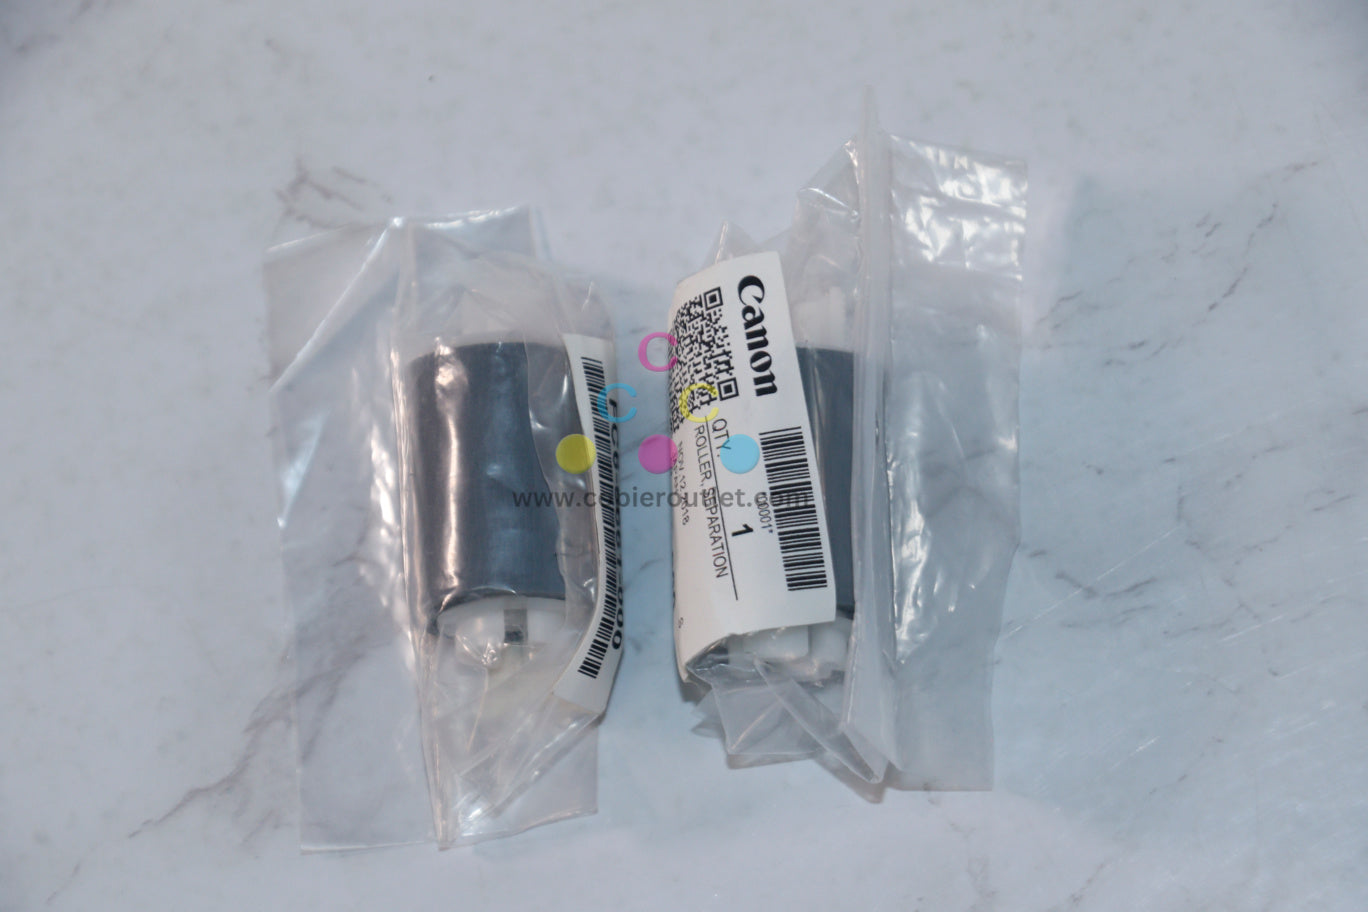 2 New OEM Canon iR 6055,6065,6075 Bypass(Manual)Separation Roller FC6-6661-000